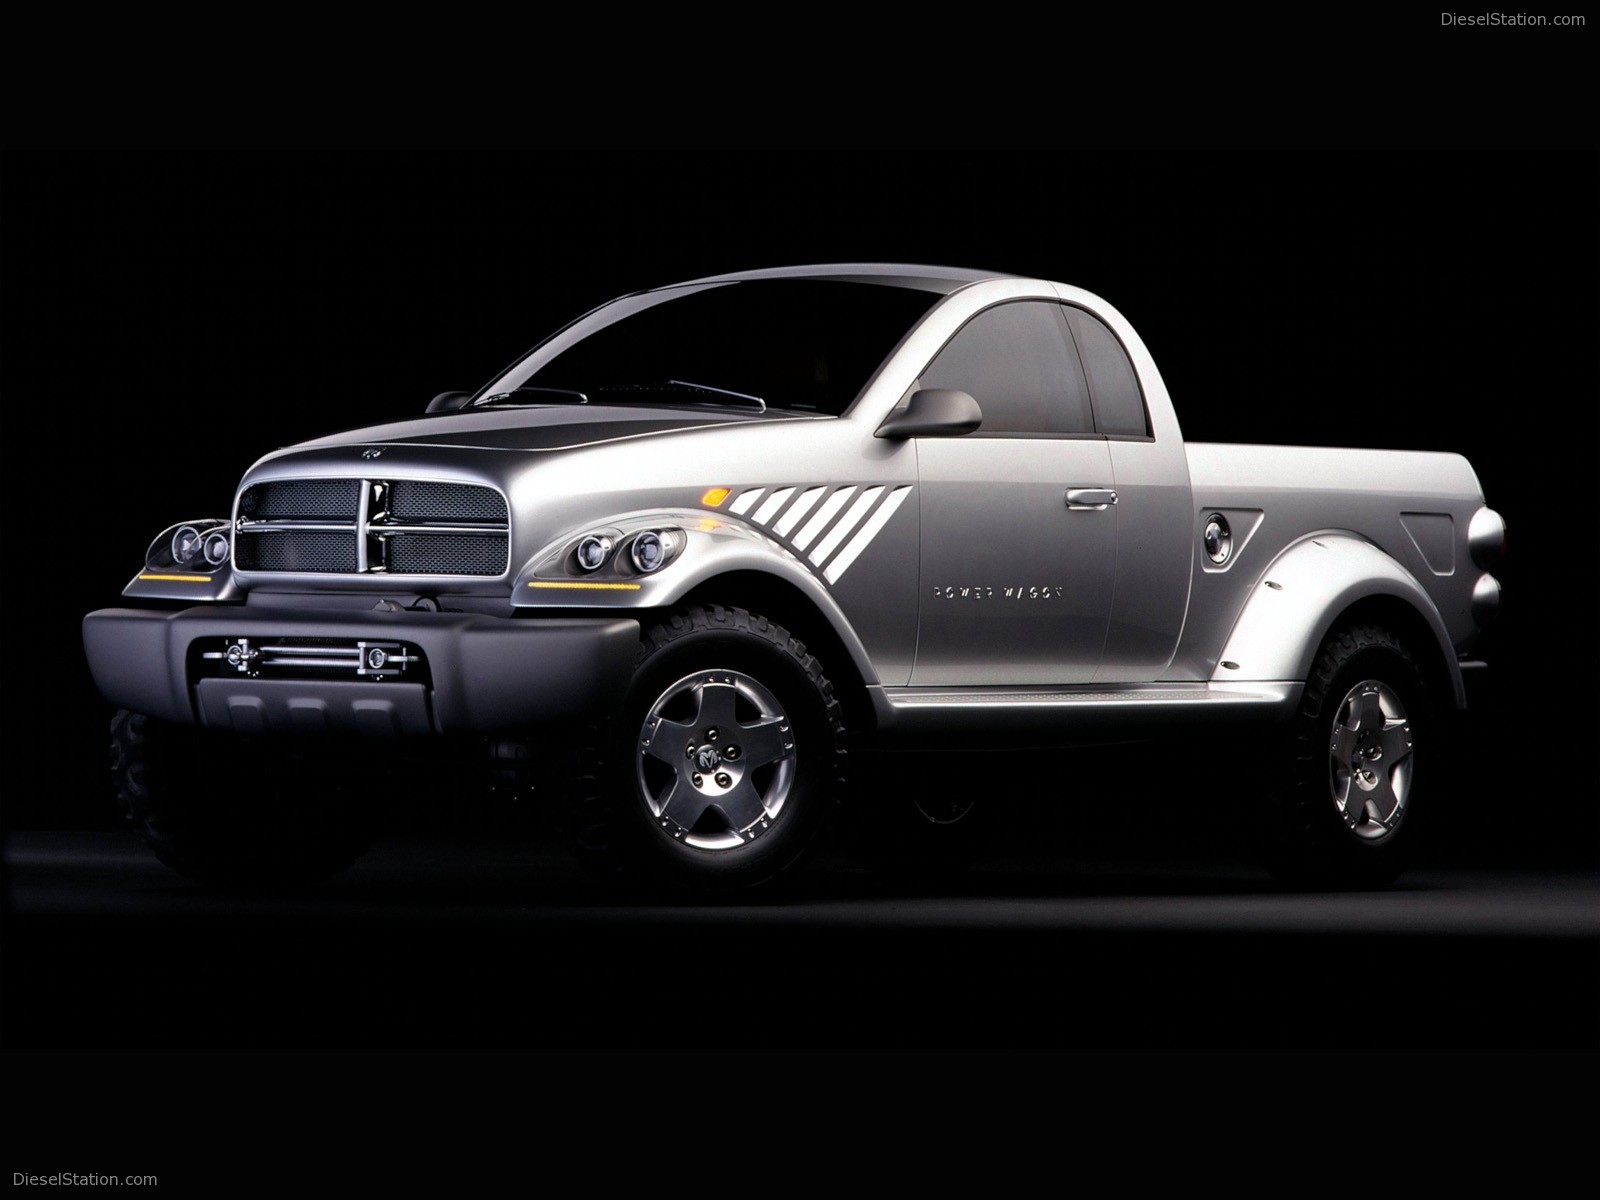 Dodge Power Wagon Concept Exotic Car Picture Of Diesel